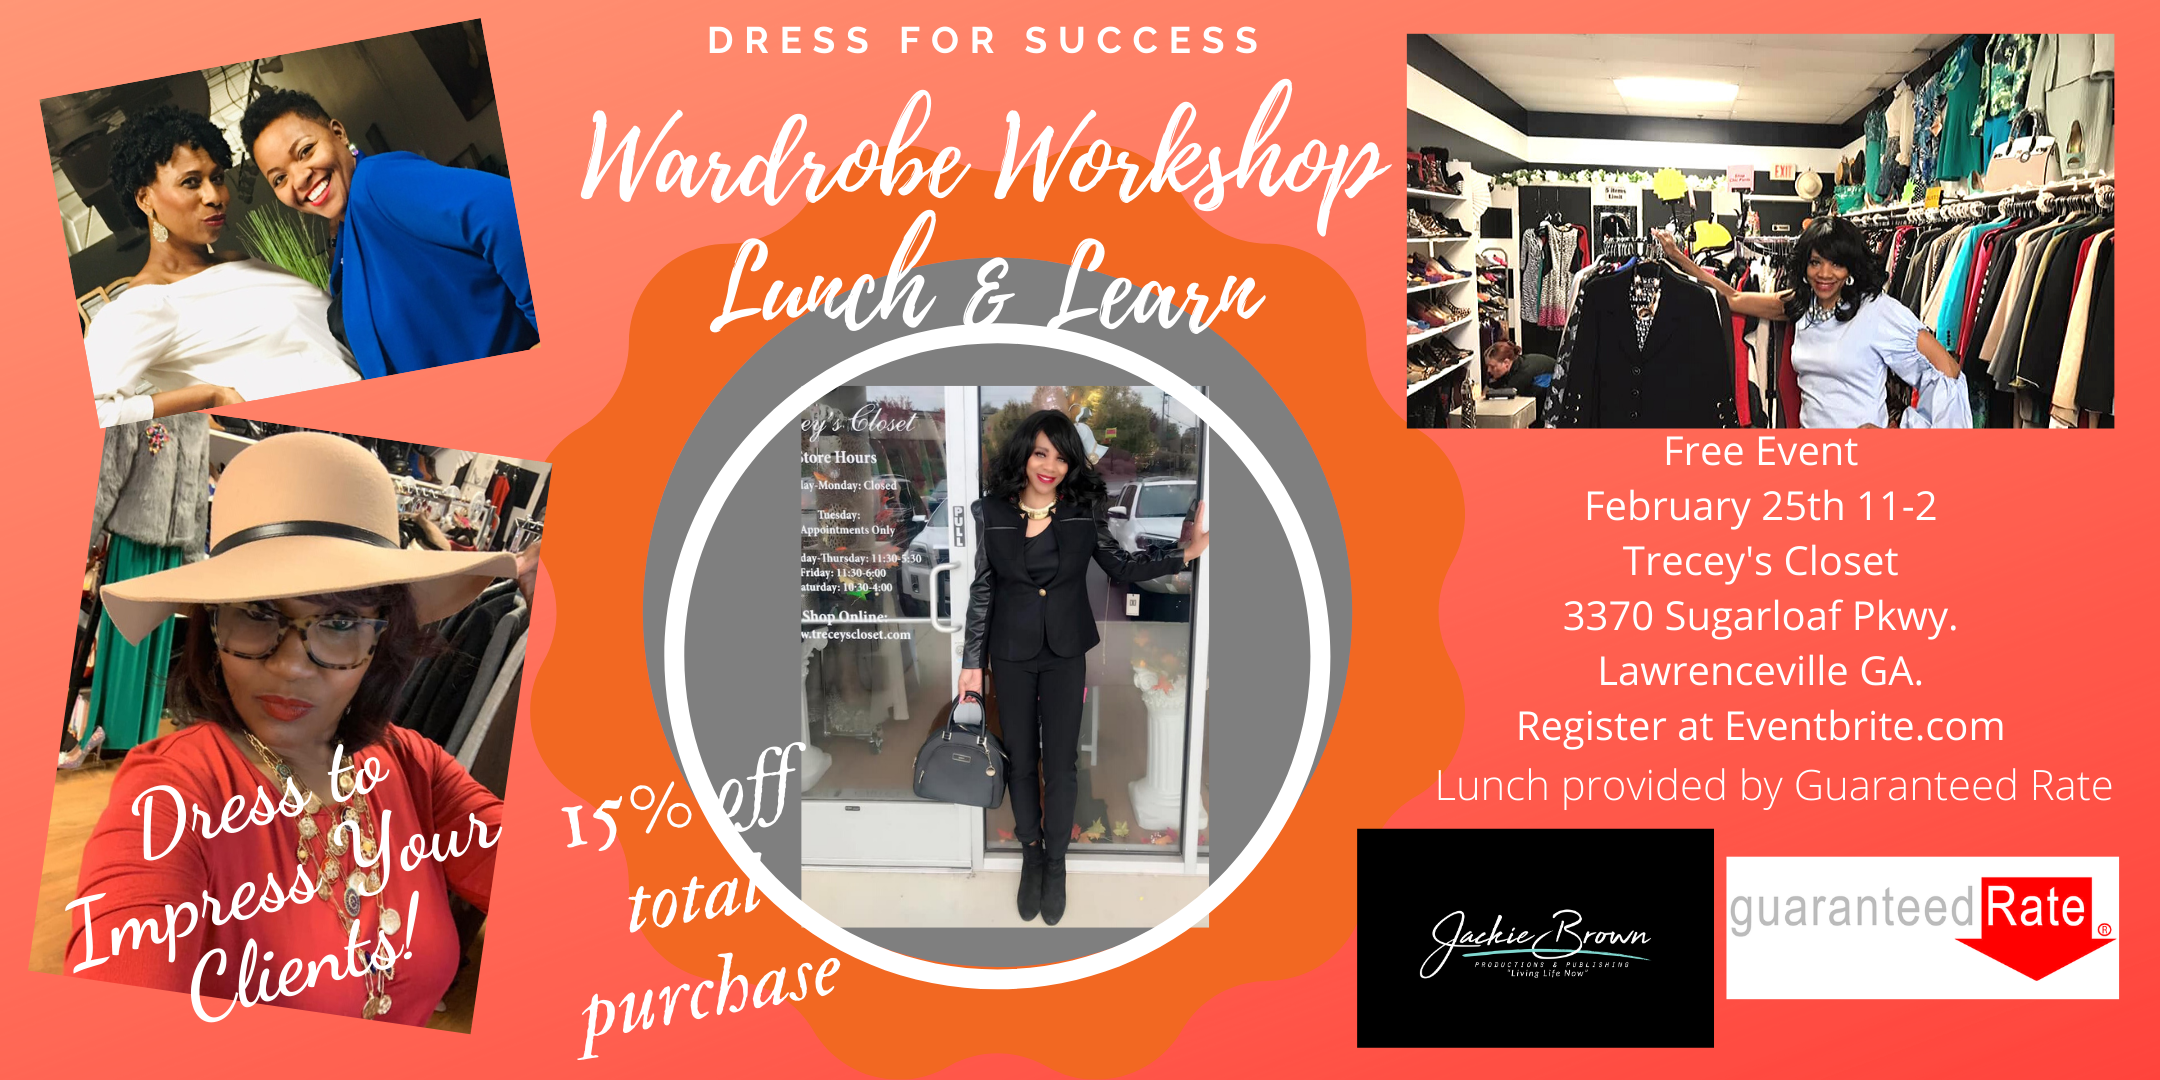 Lunch and Learn: Dress For Success - Wardrobe Workshop